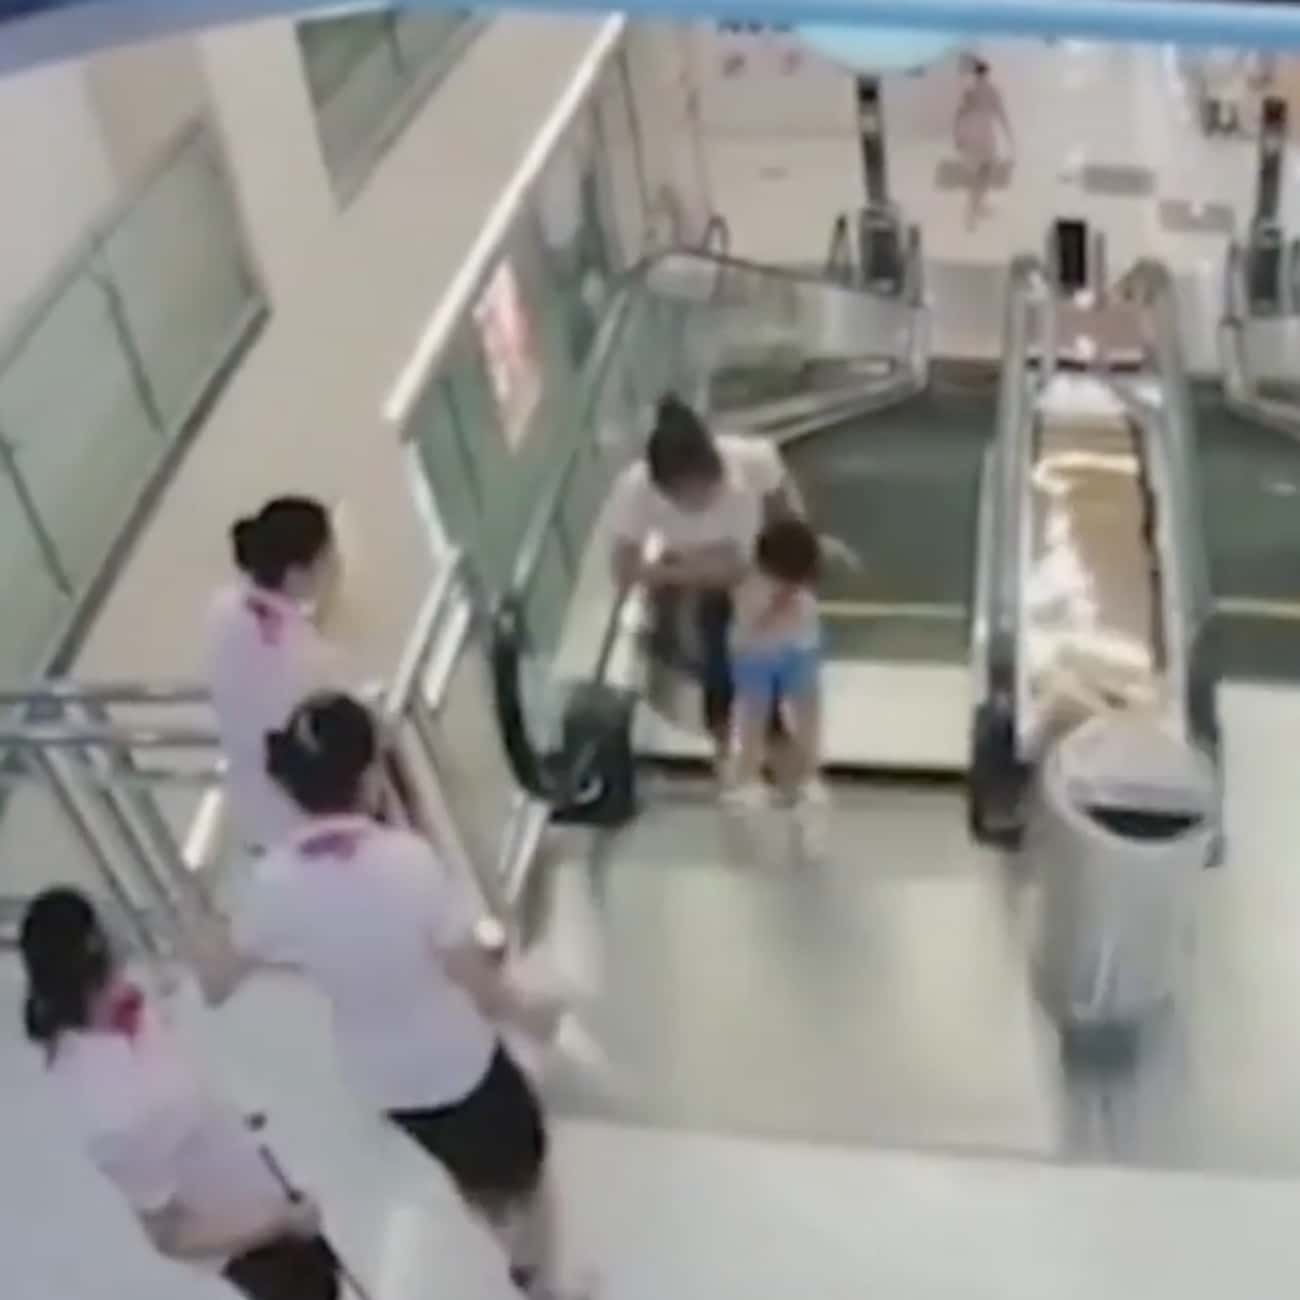 Mother Saves Son but Perishes in Escalator Malfunction